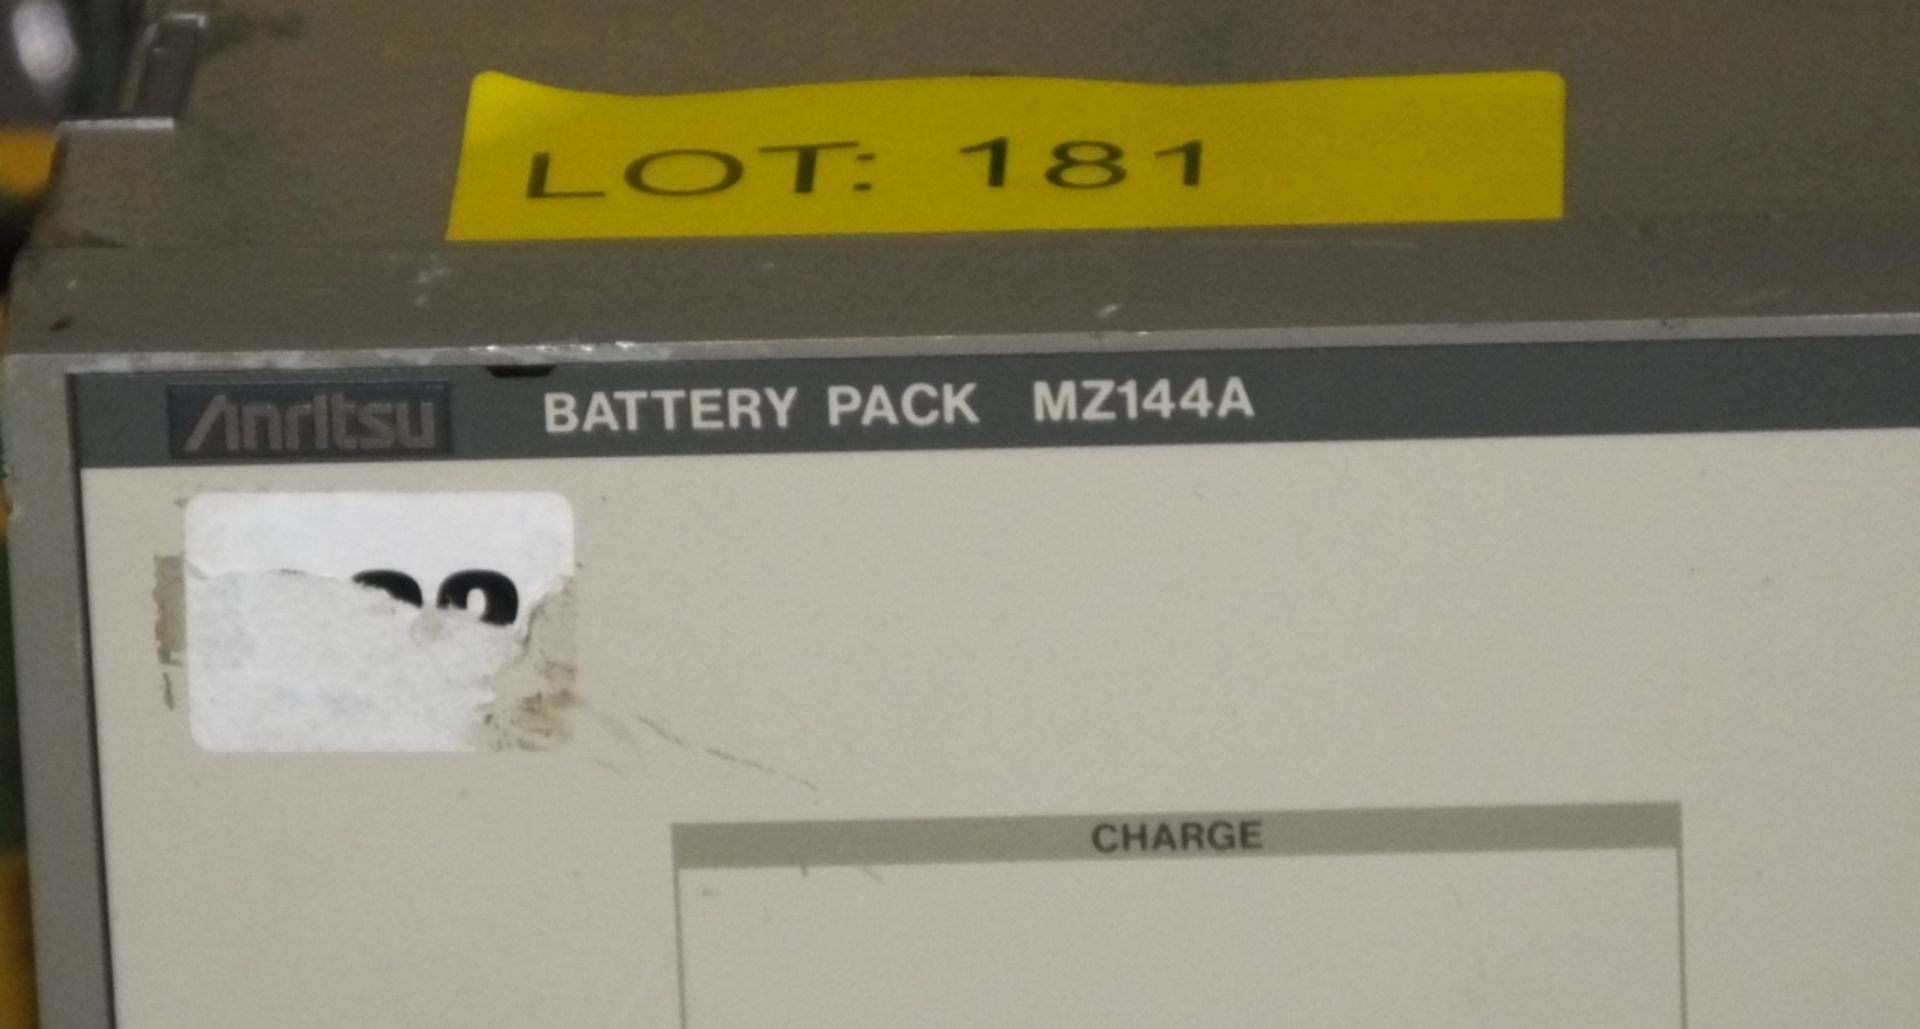 Anritsu Battery Pack - MZ144A - Image 2 of 2